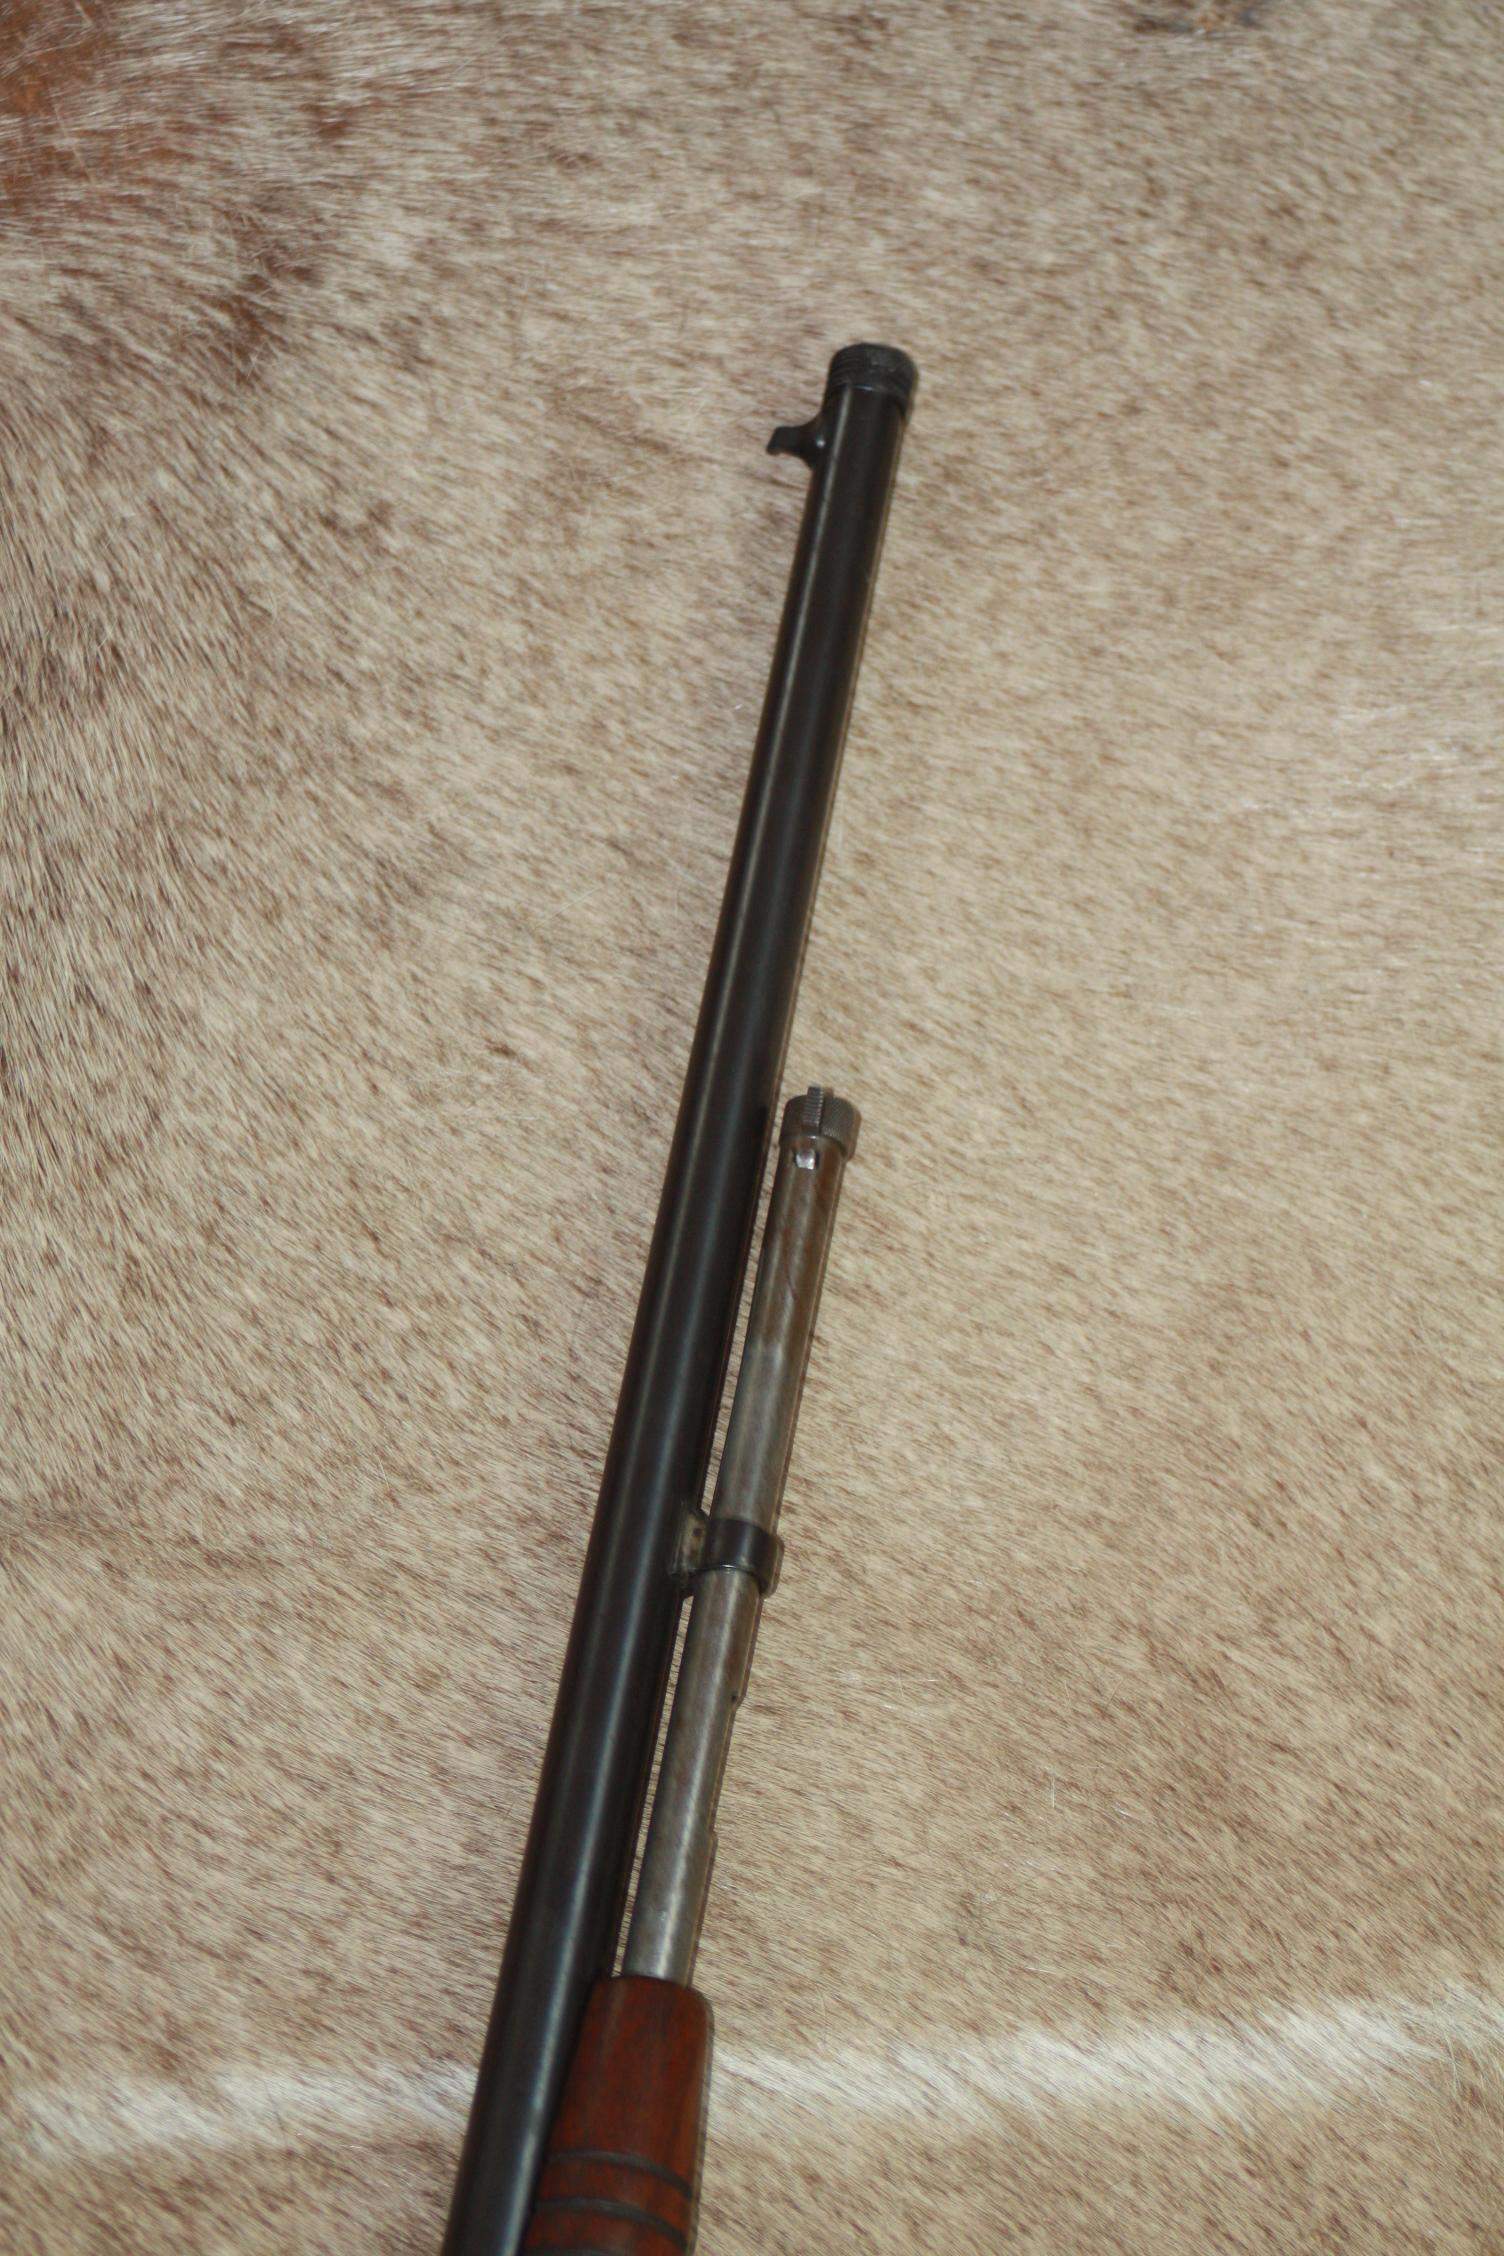 B.S.A. .22LR Pump Action Sporting Rifle. Shoots .22 LR and .22 Short.